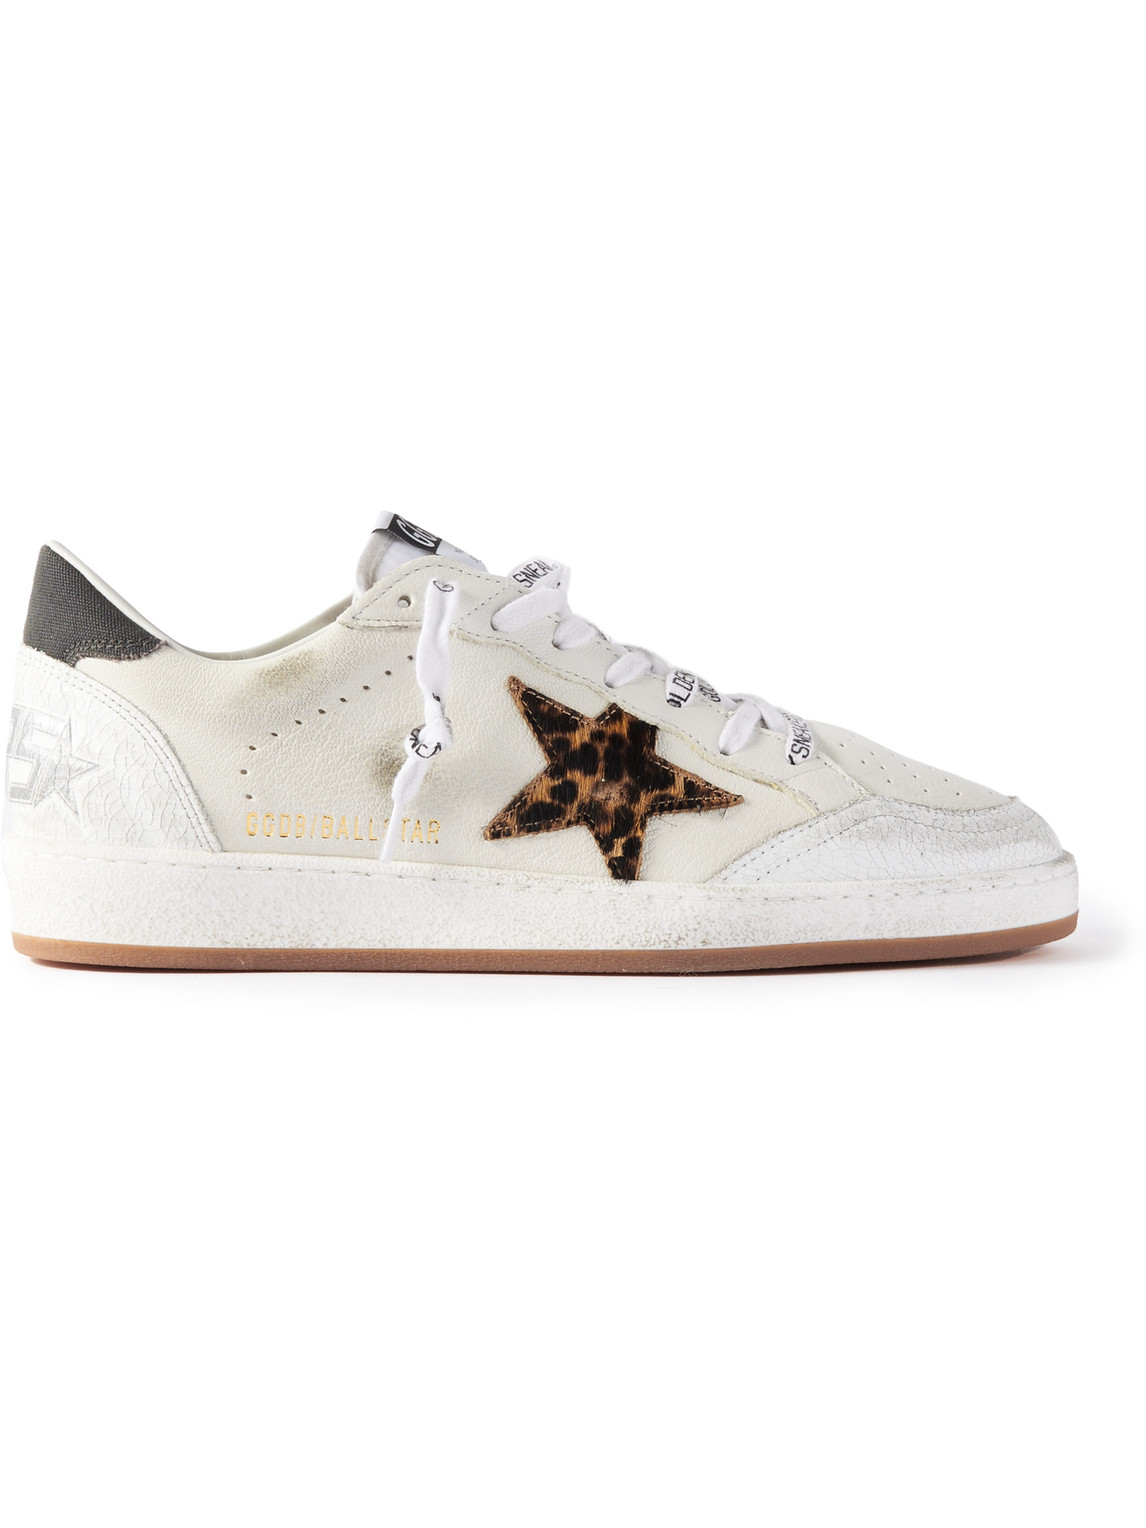 Ballstar Distressed Calf Hair-Trimmed Leather Sneakers